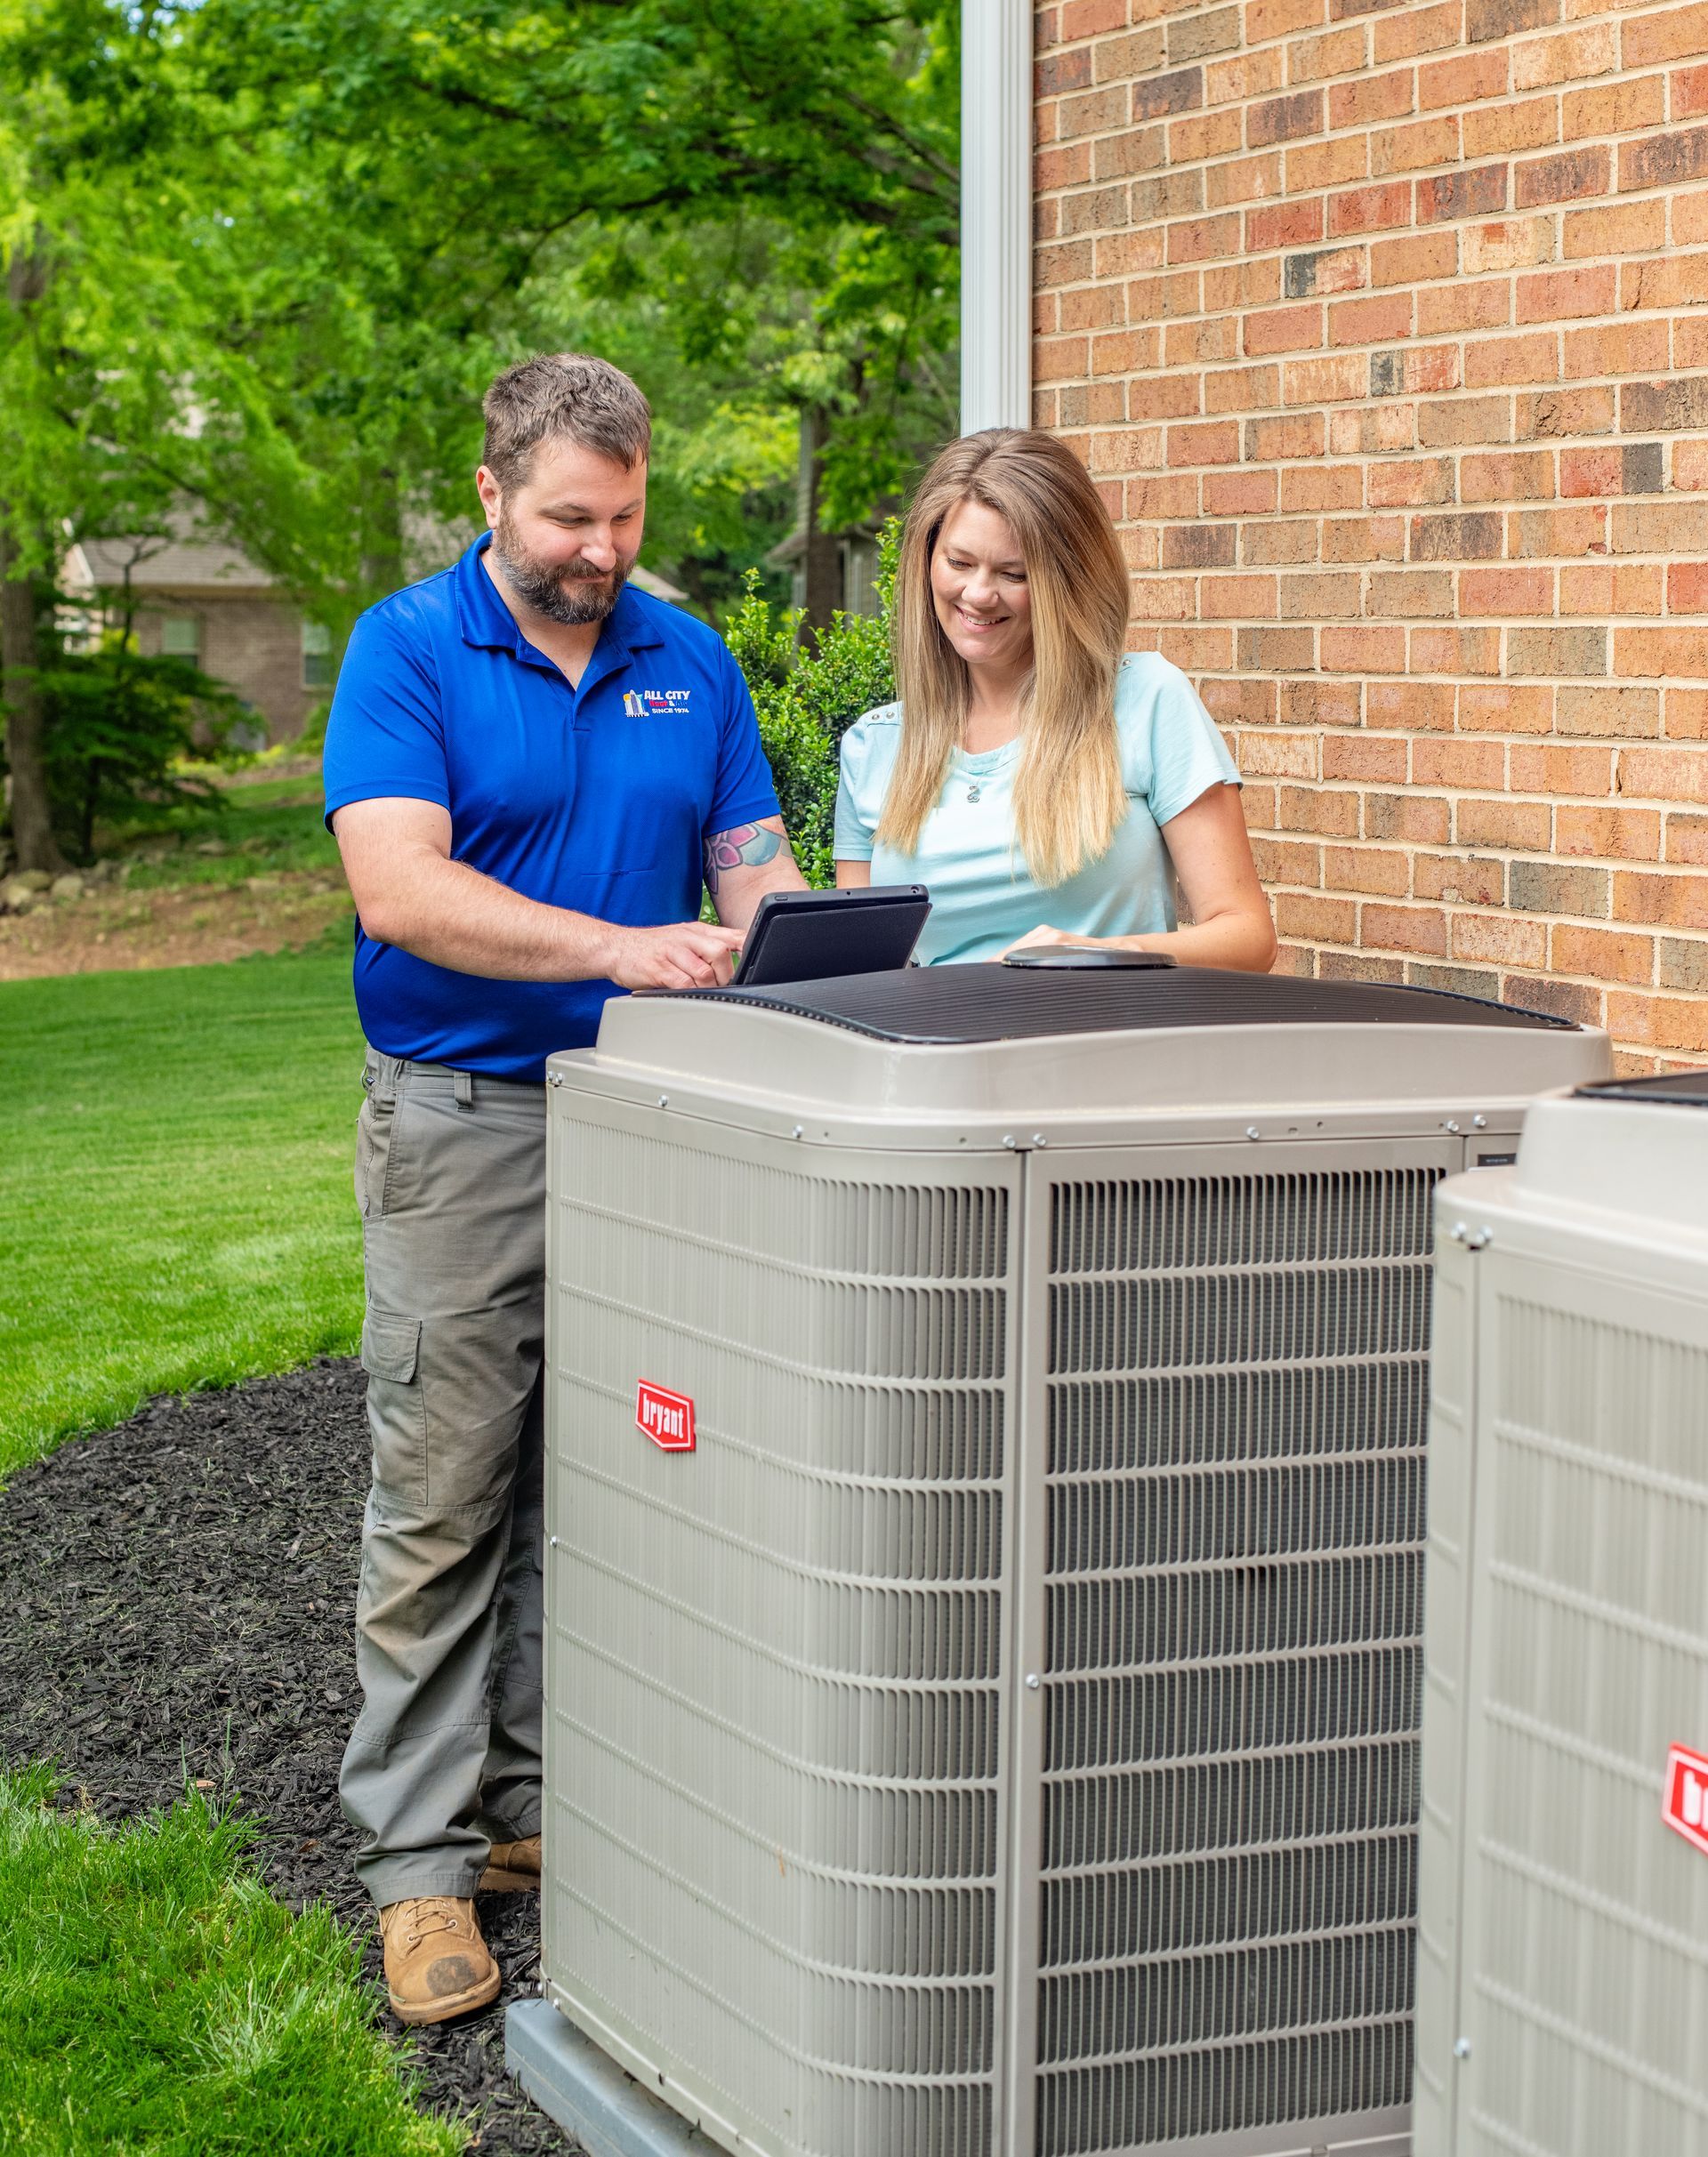 An All City Heat and Air technician and a woman are standing next to an air conditioner.